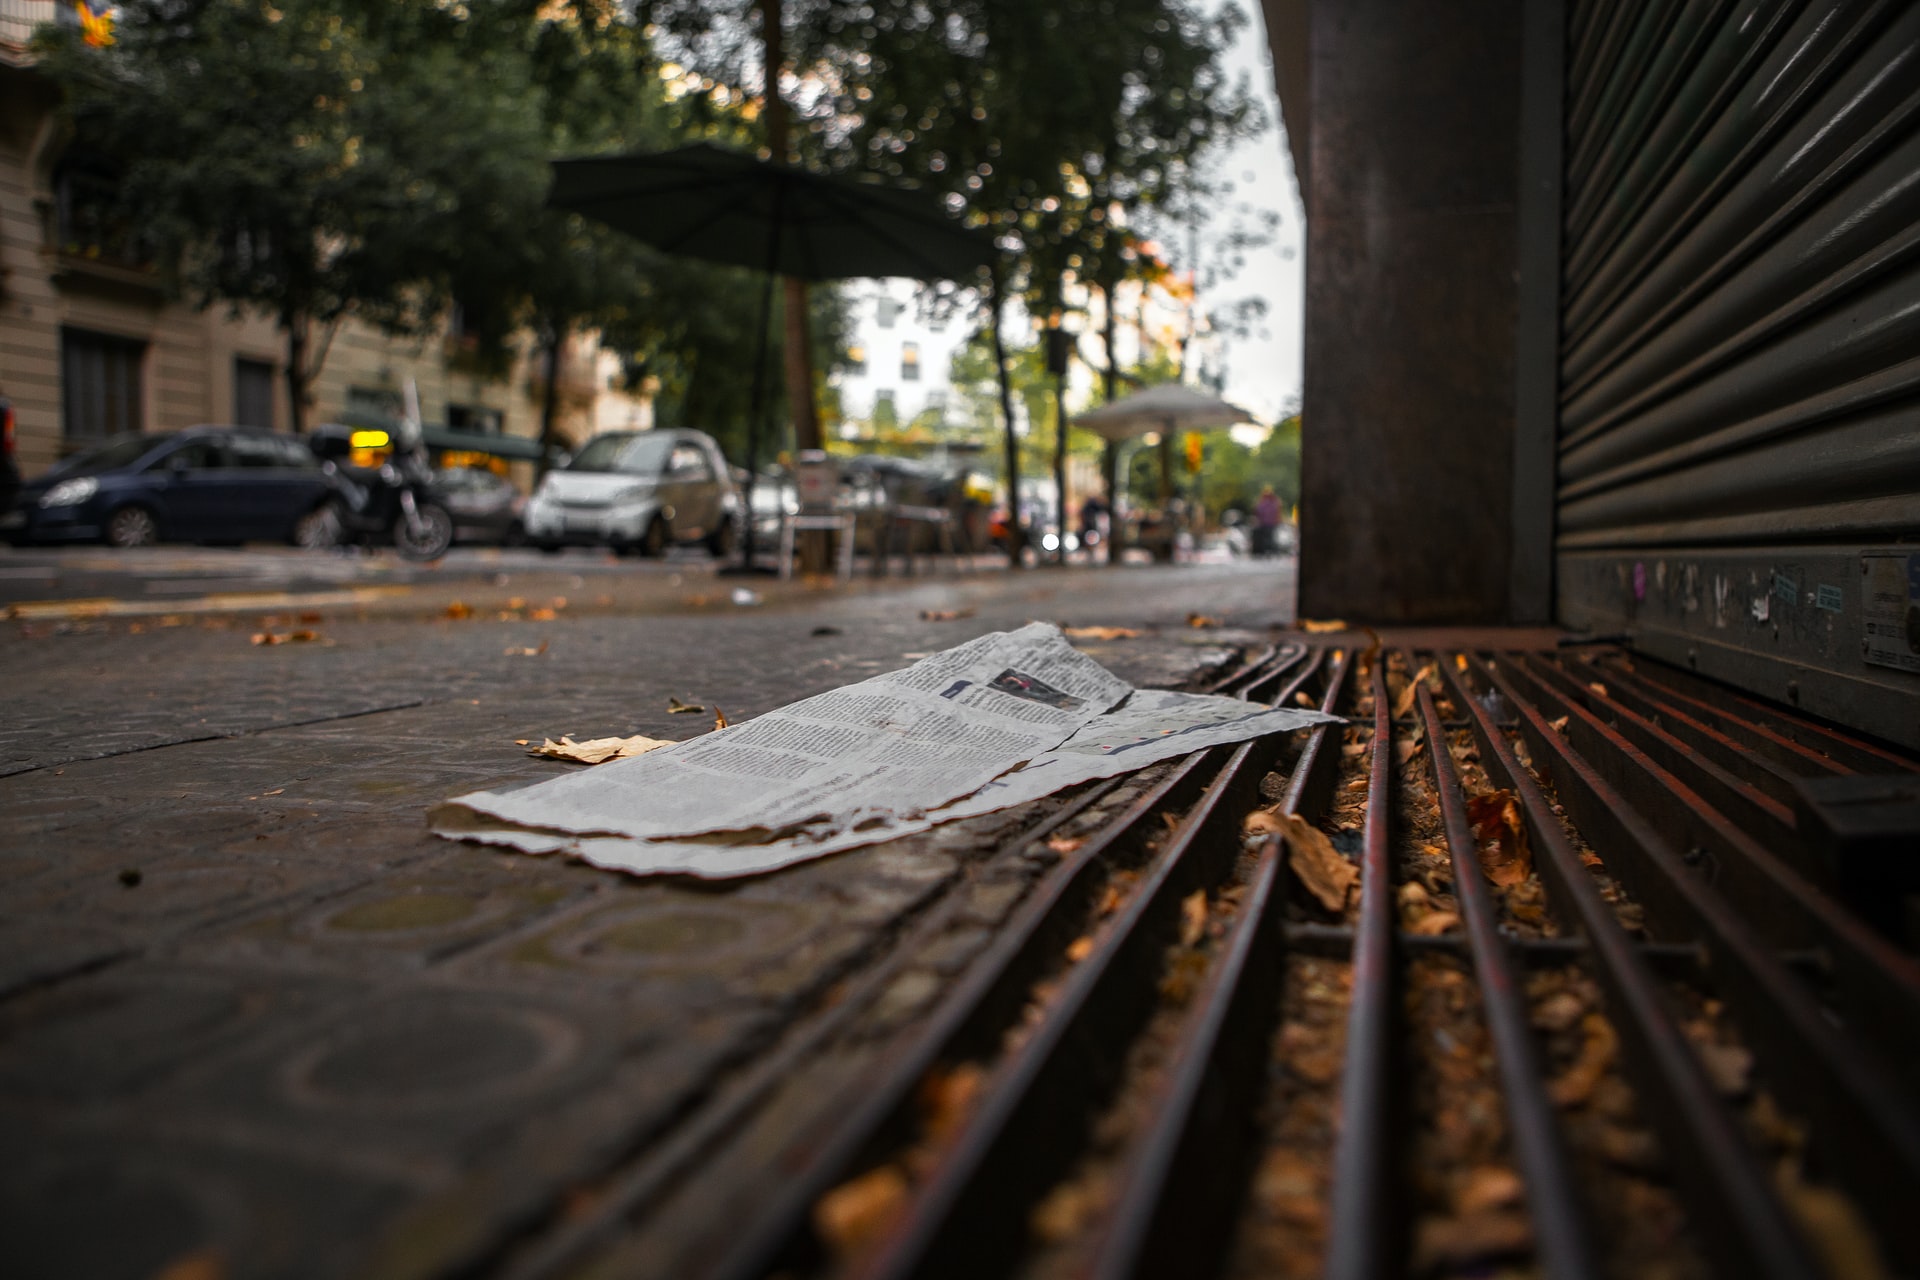 A photo of a street with a discarded newspaper in the foreground.